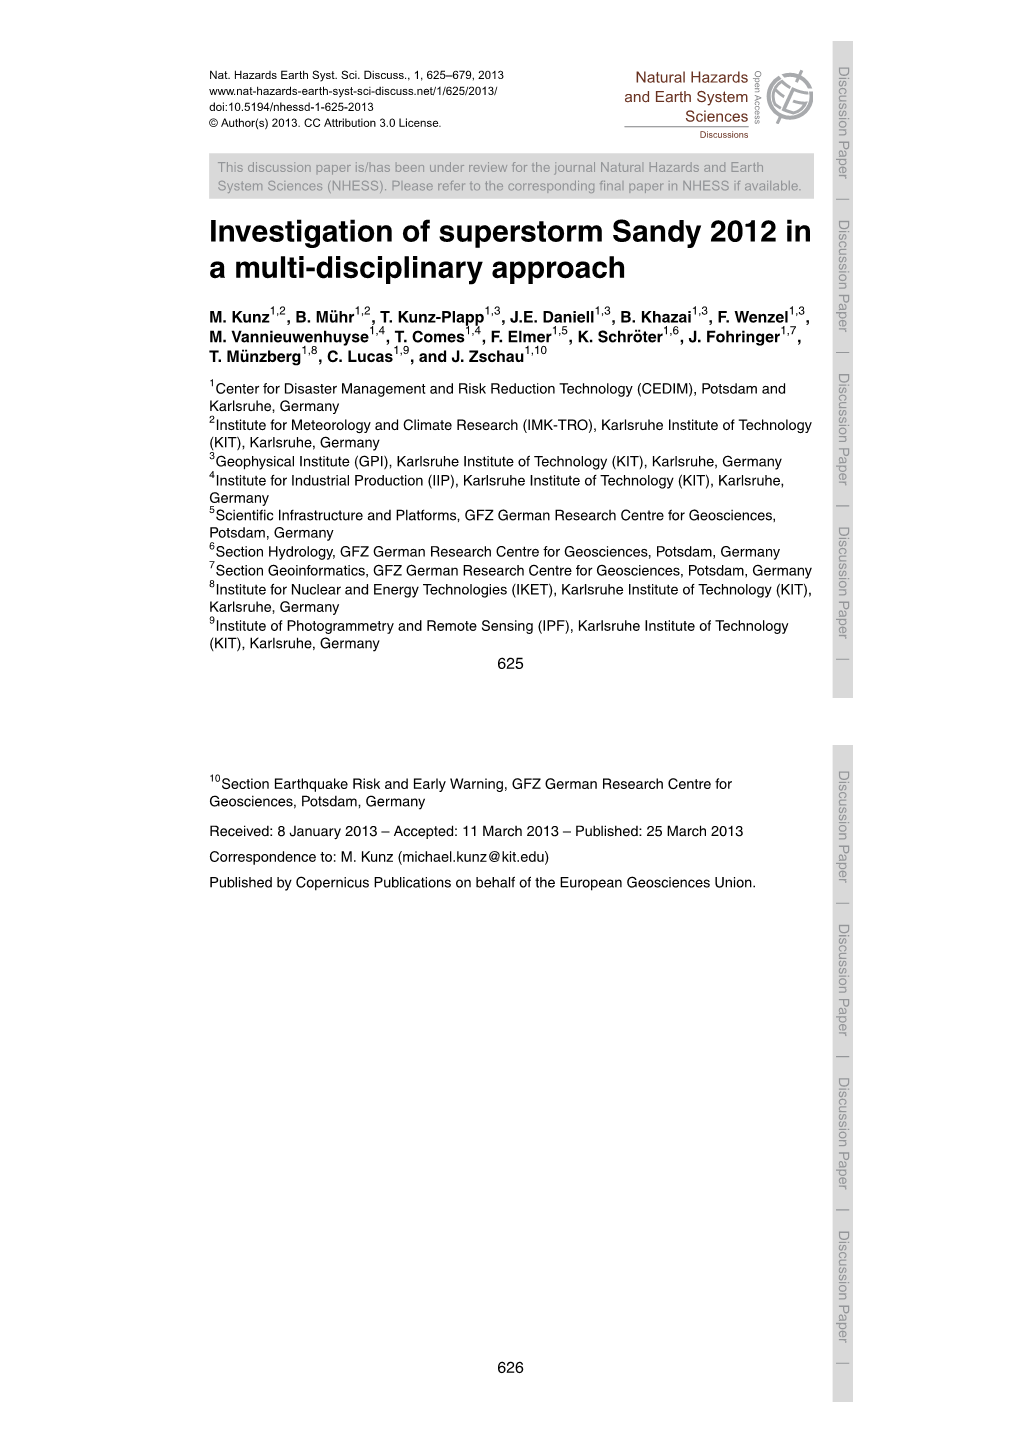 Investigation of Superstorm Sandy 2012 in a Multi-Disciplinary Approach